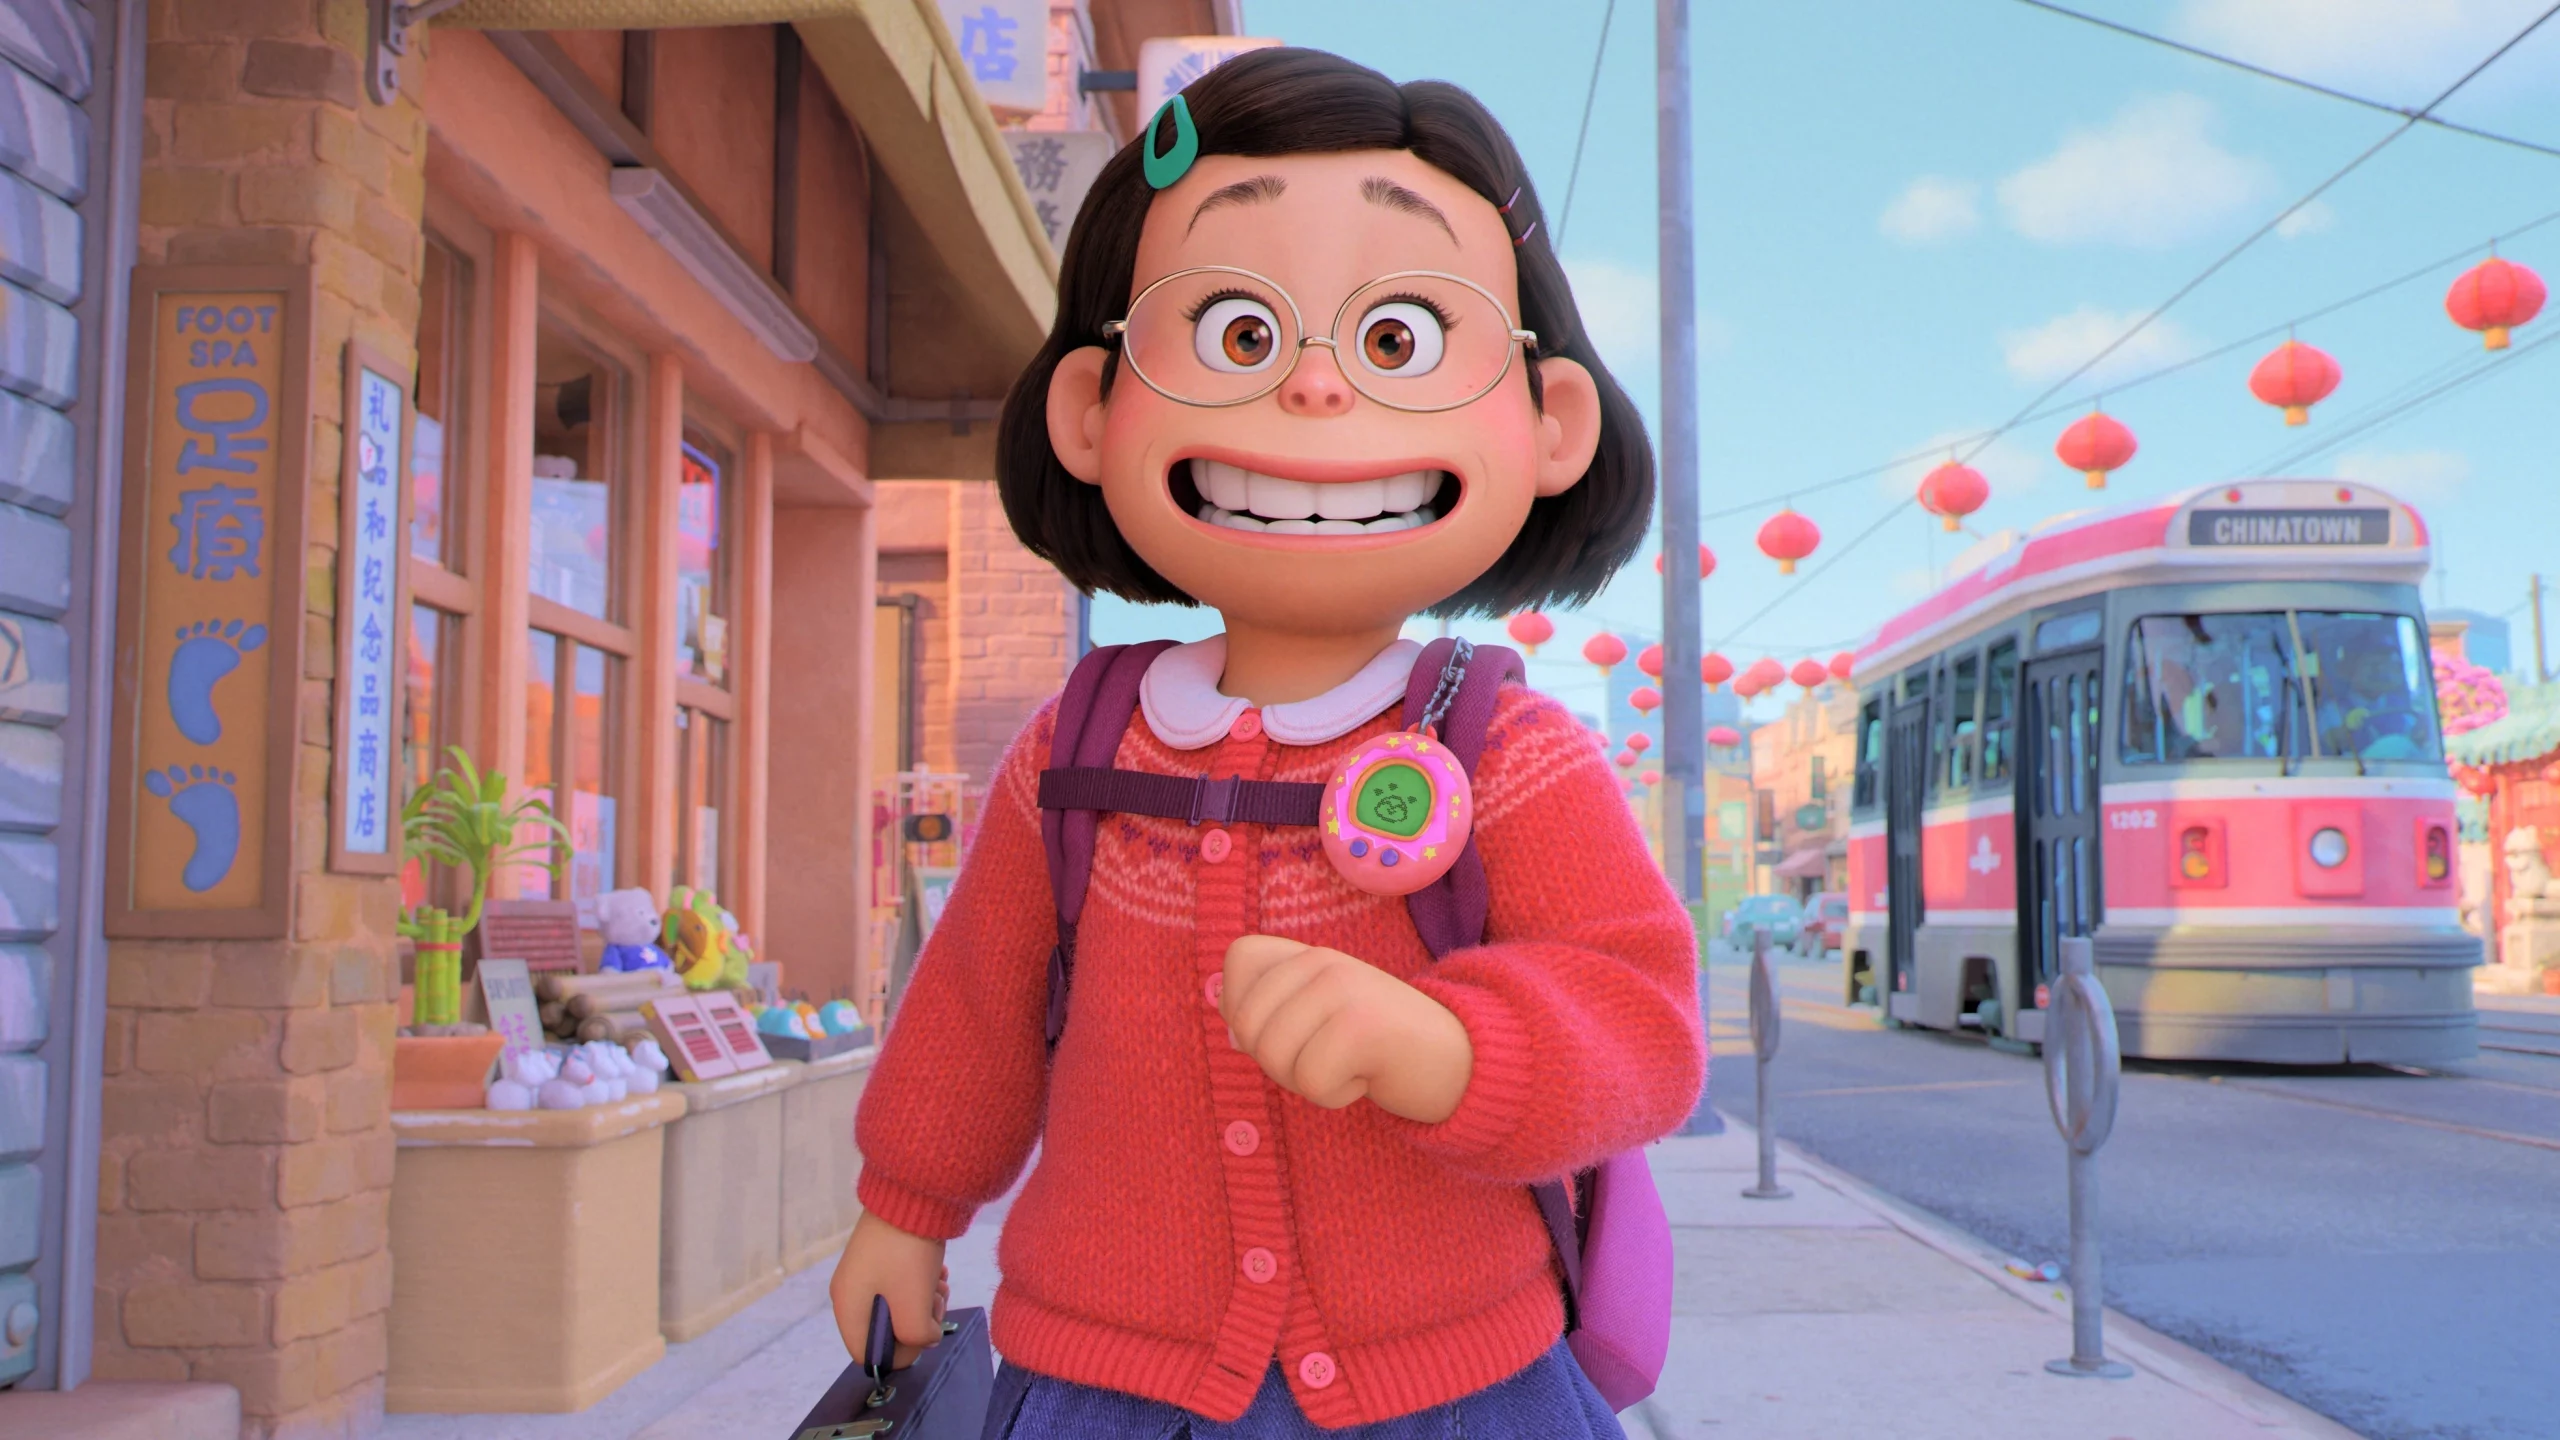 Mei from Turning Red walks down the street